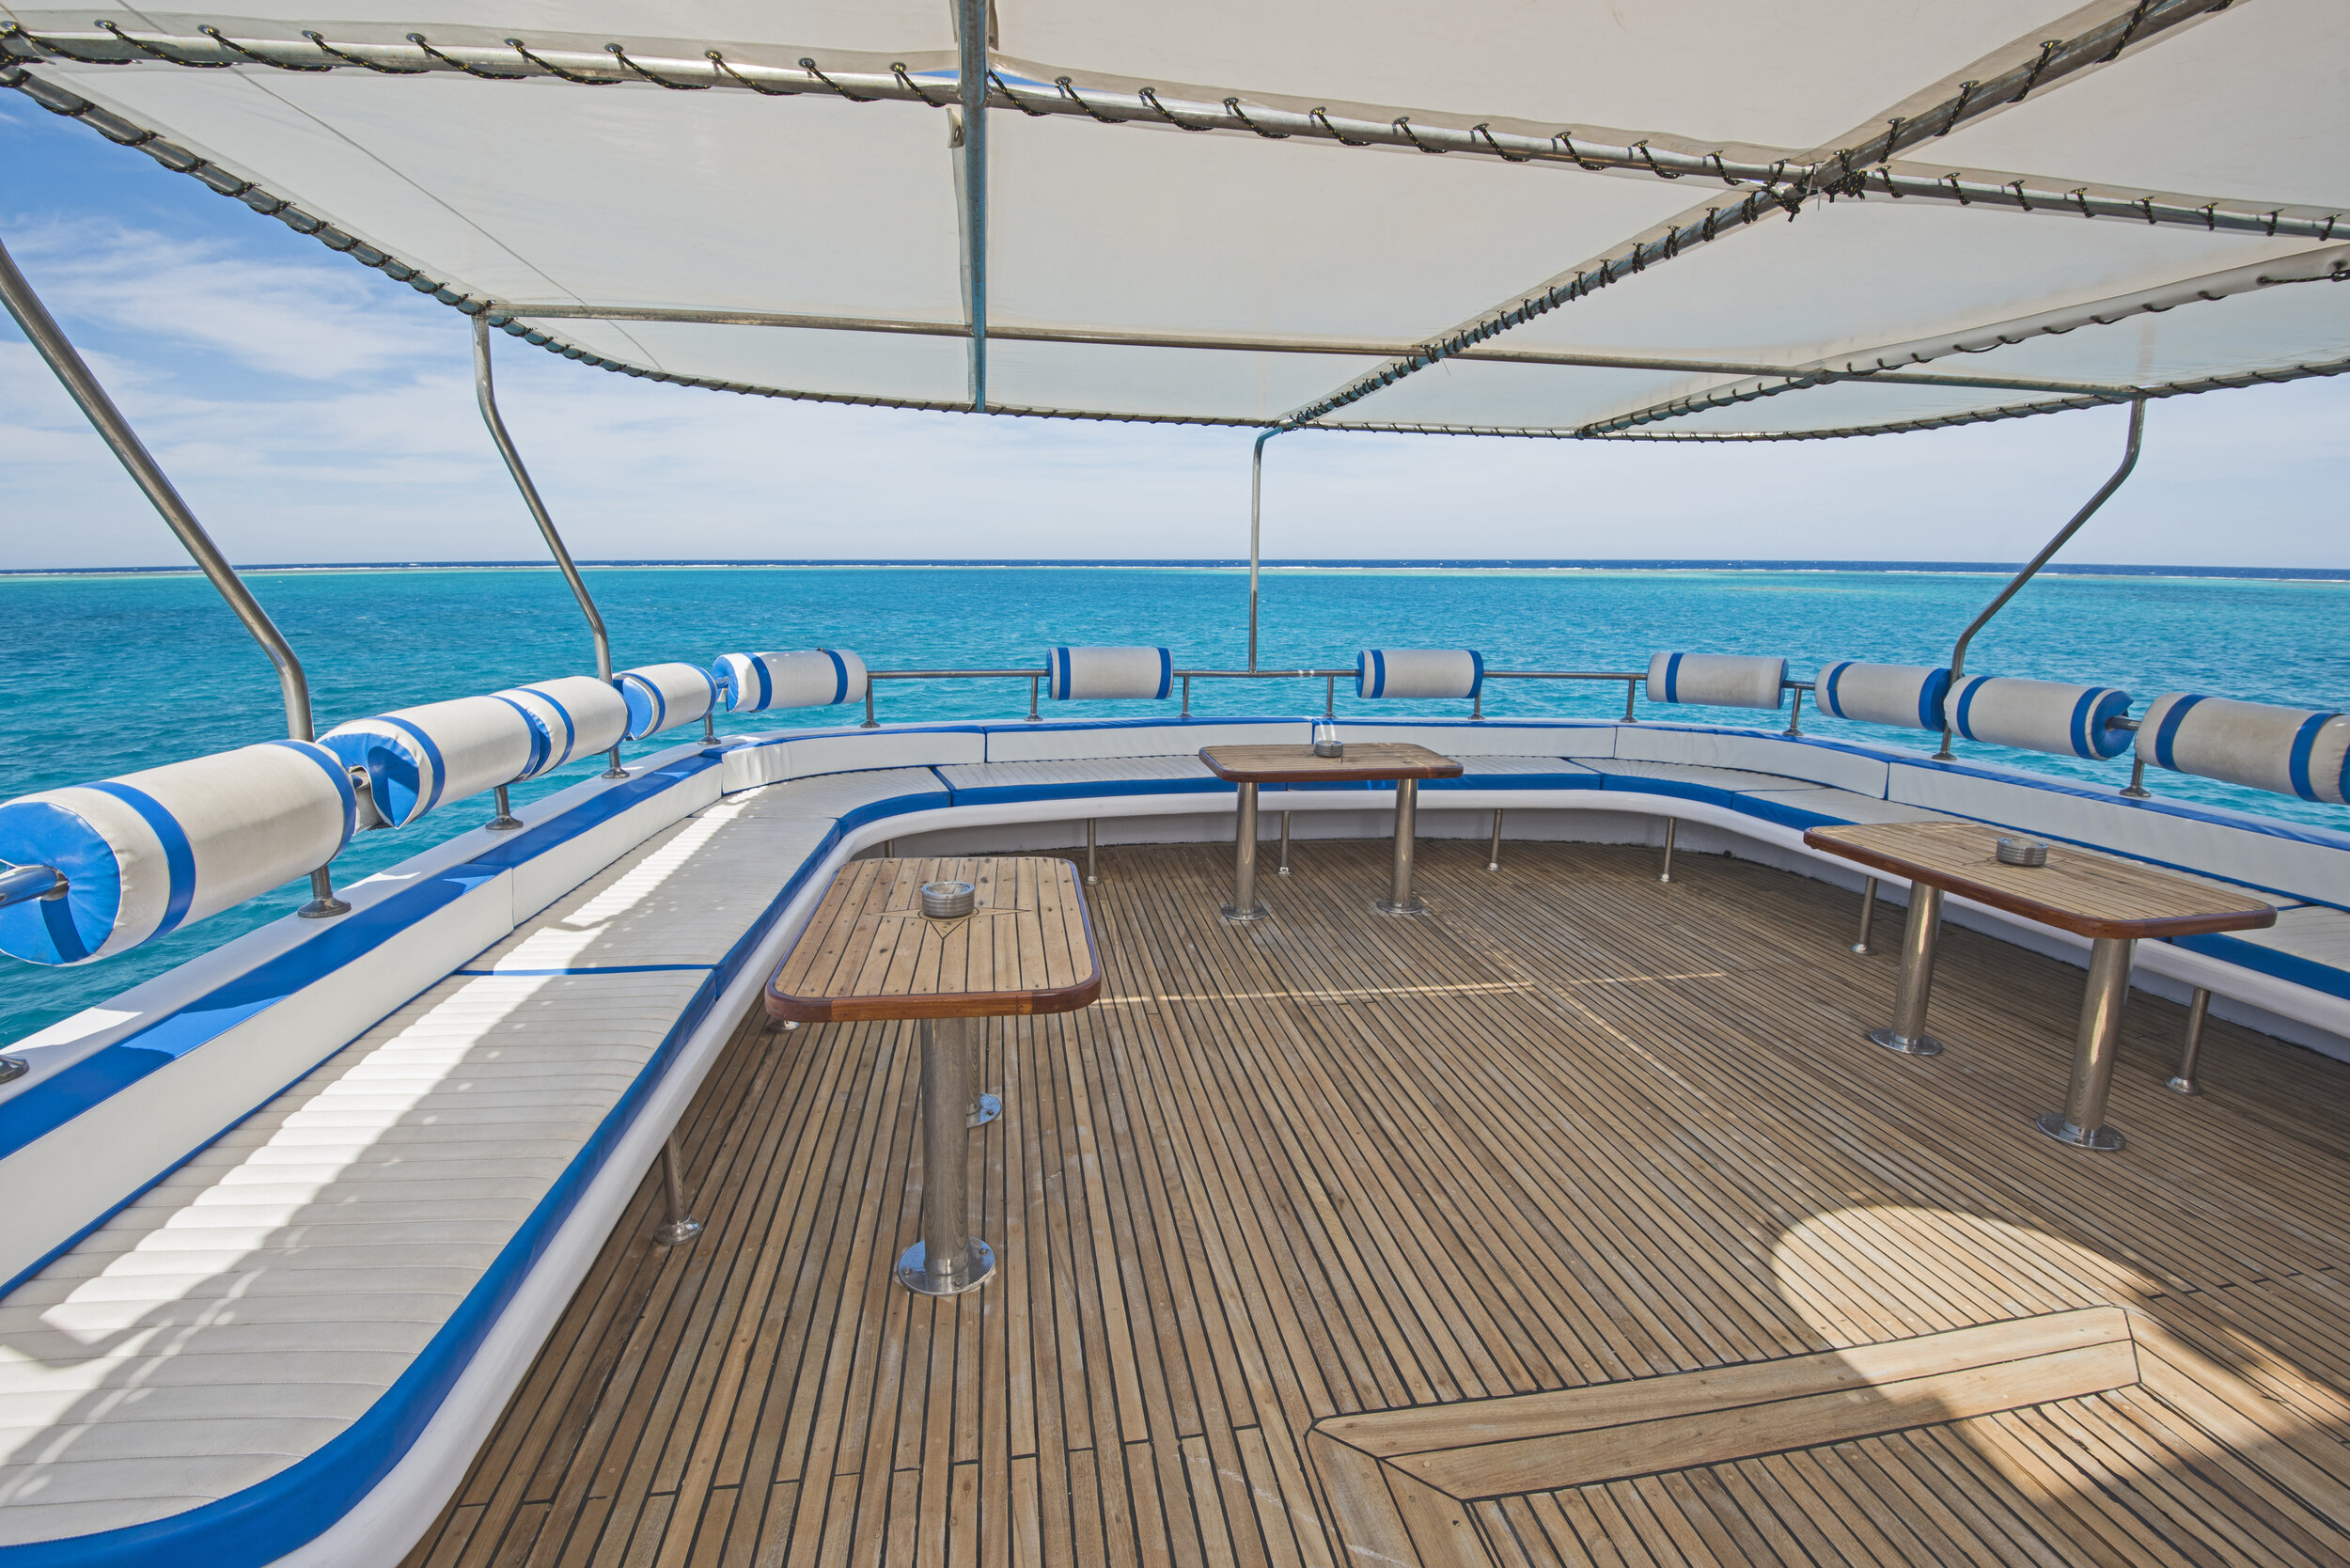 Table-and-chairs-on-sundeck-of-a-luxury-motor-yacht-1137631492_3866x2580.jpeg